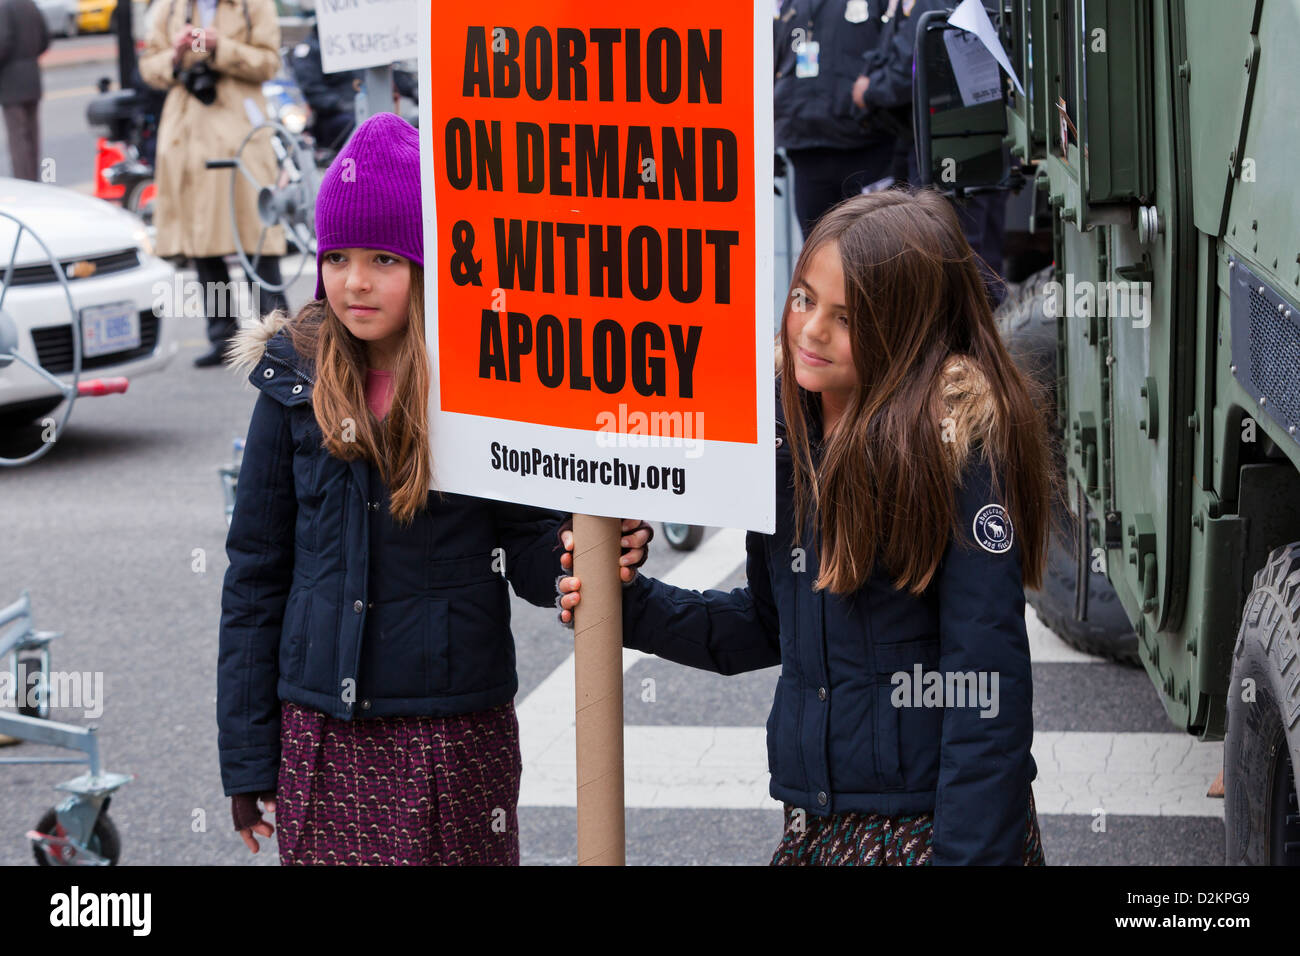 Young girls holding pro abortion message placard at a demonstration Stock Photo